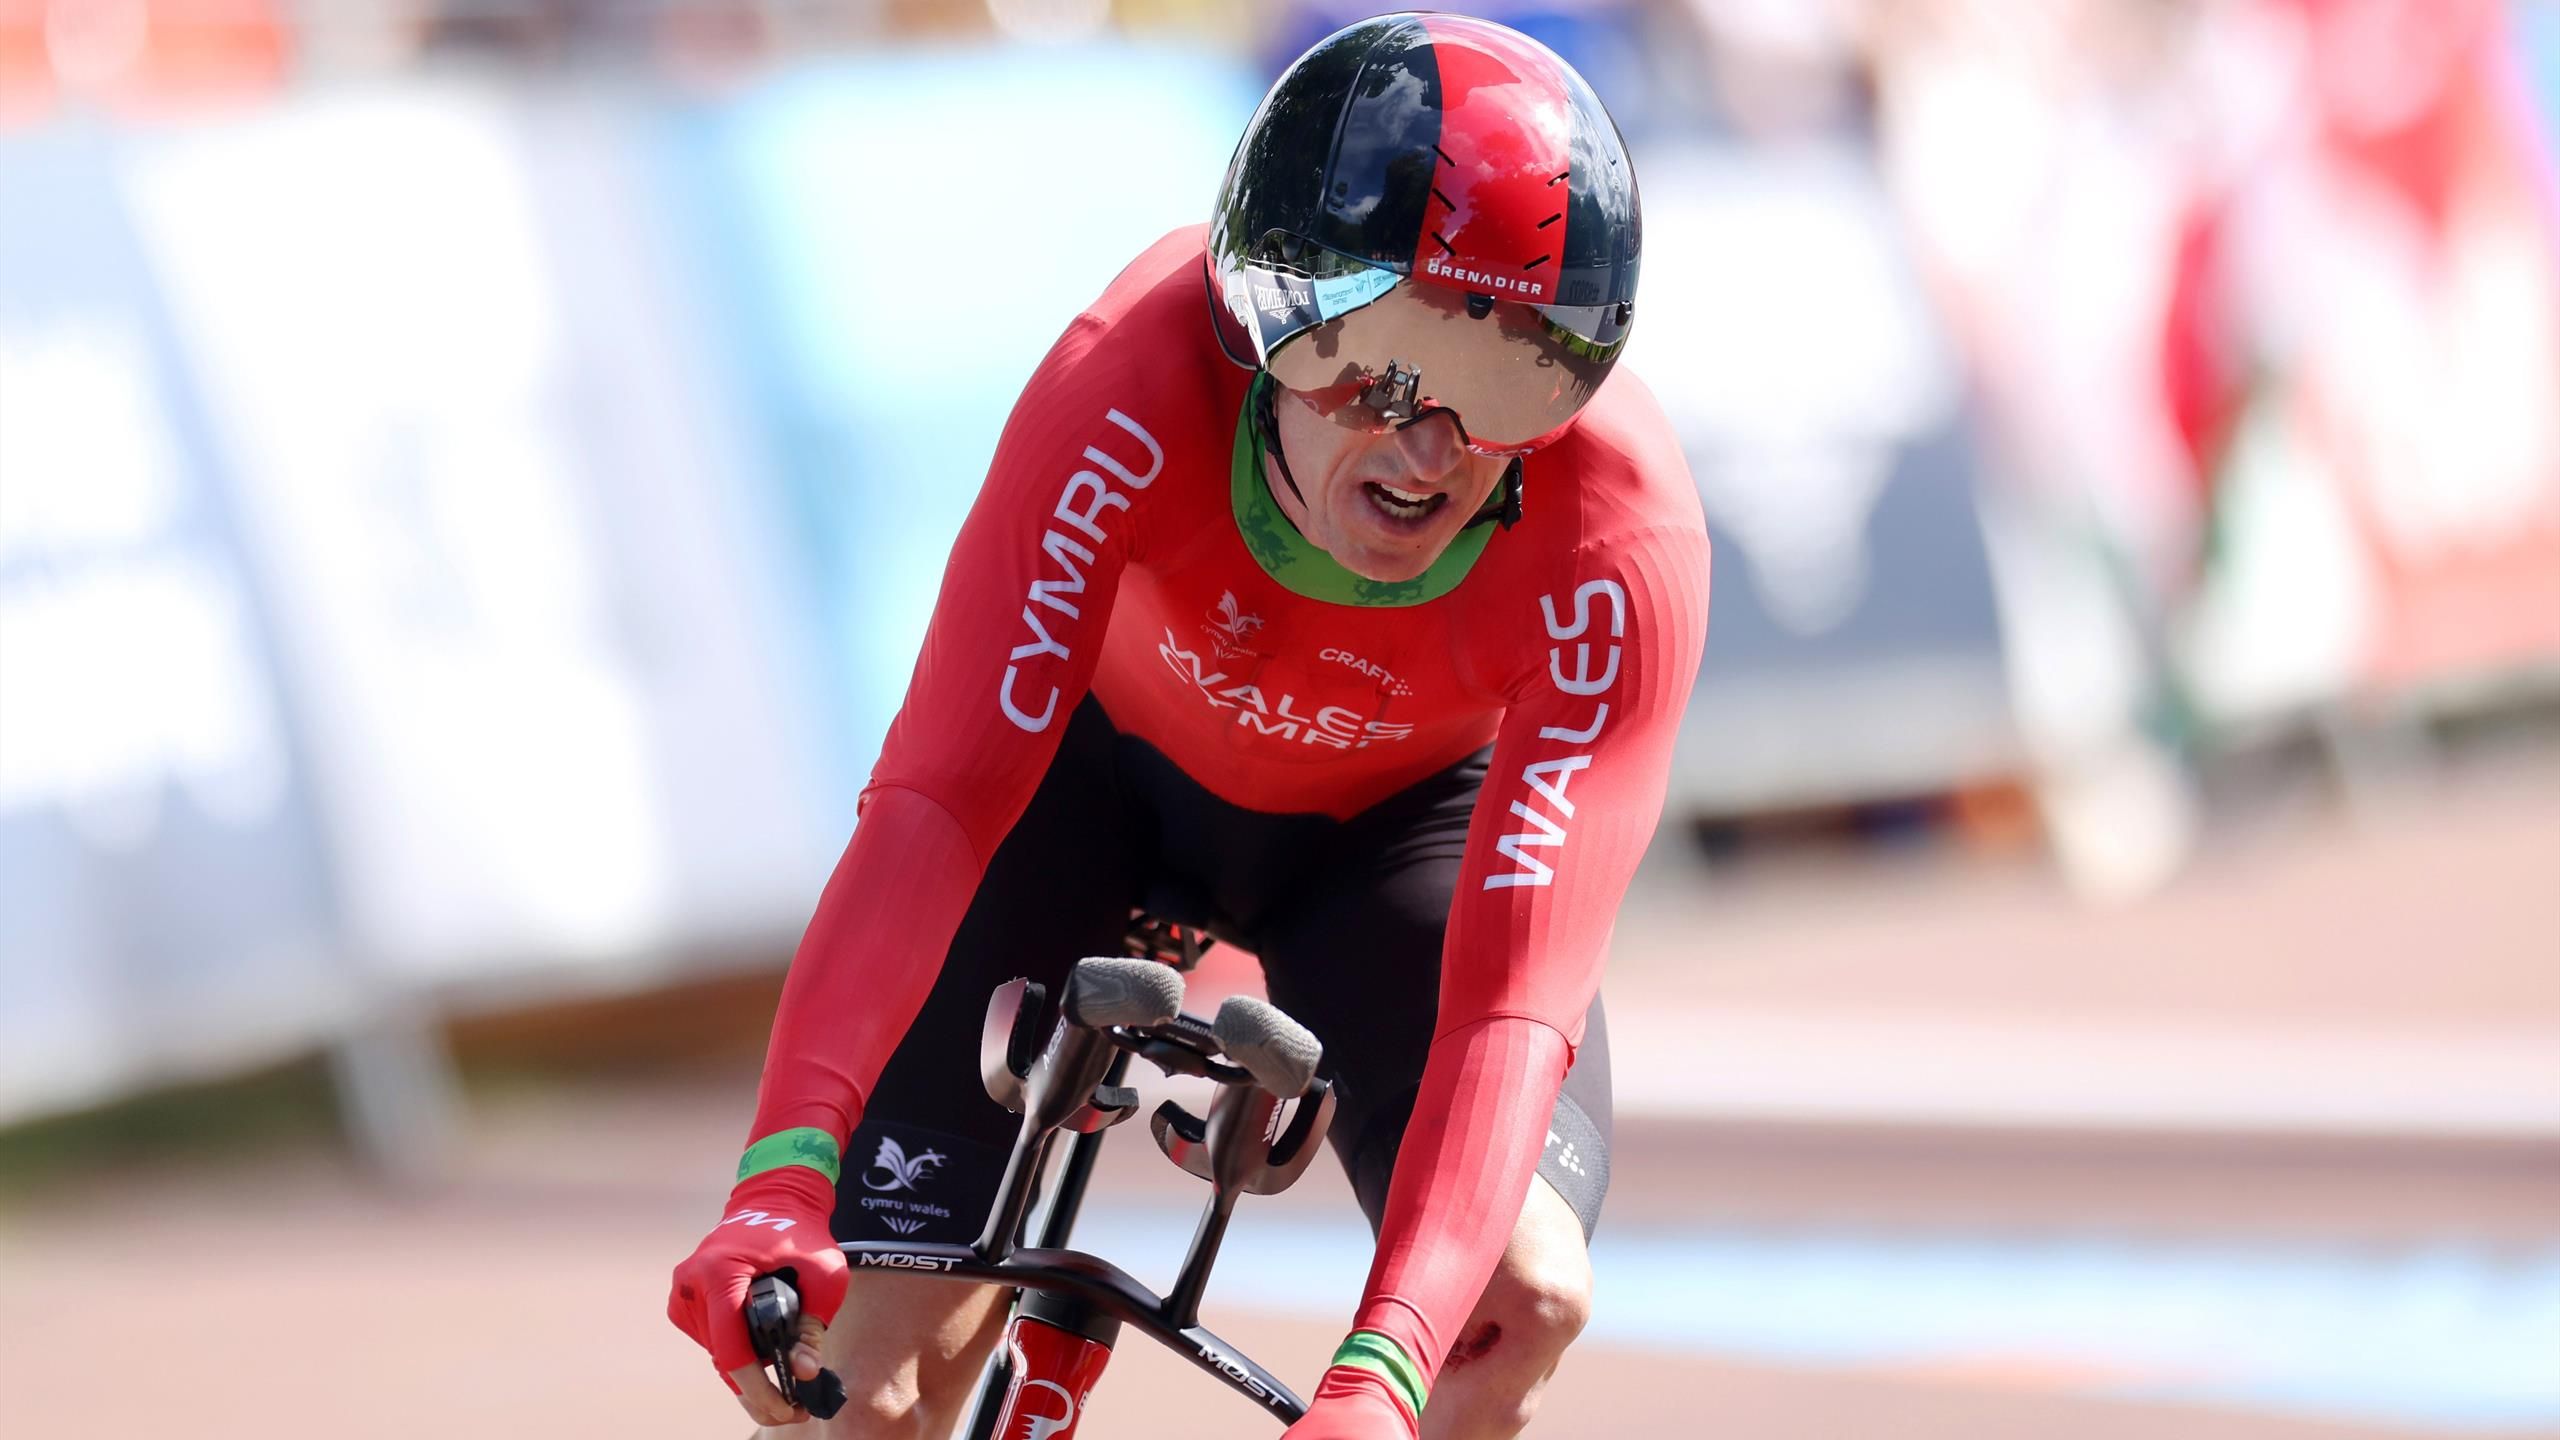 Geraint Thomas suffers crash in time trial, Rohan Dennis seals gold with Fred Wright taking silver